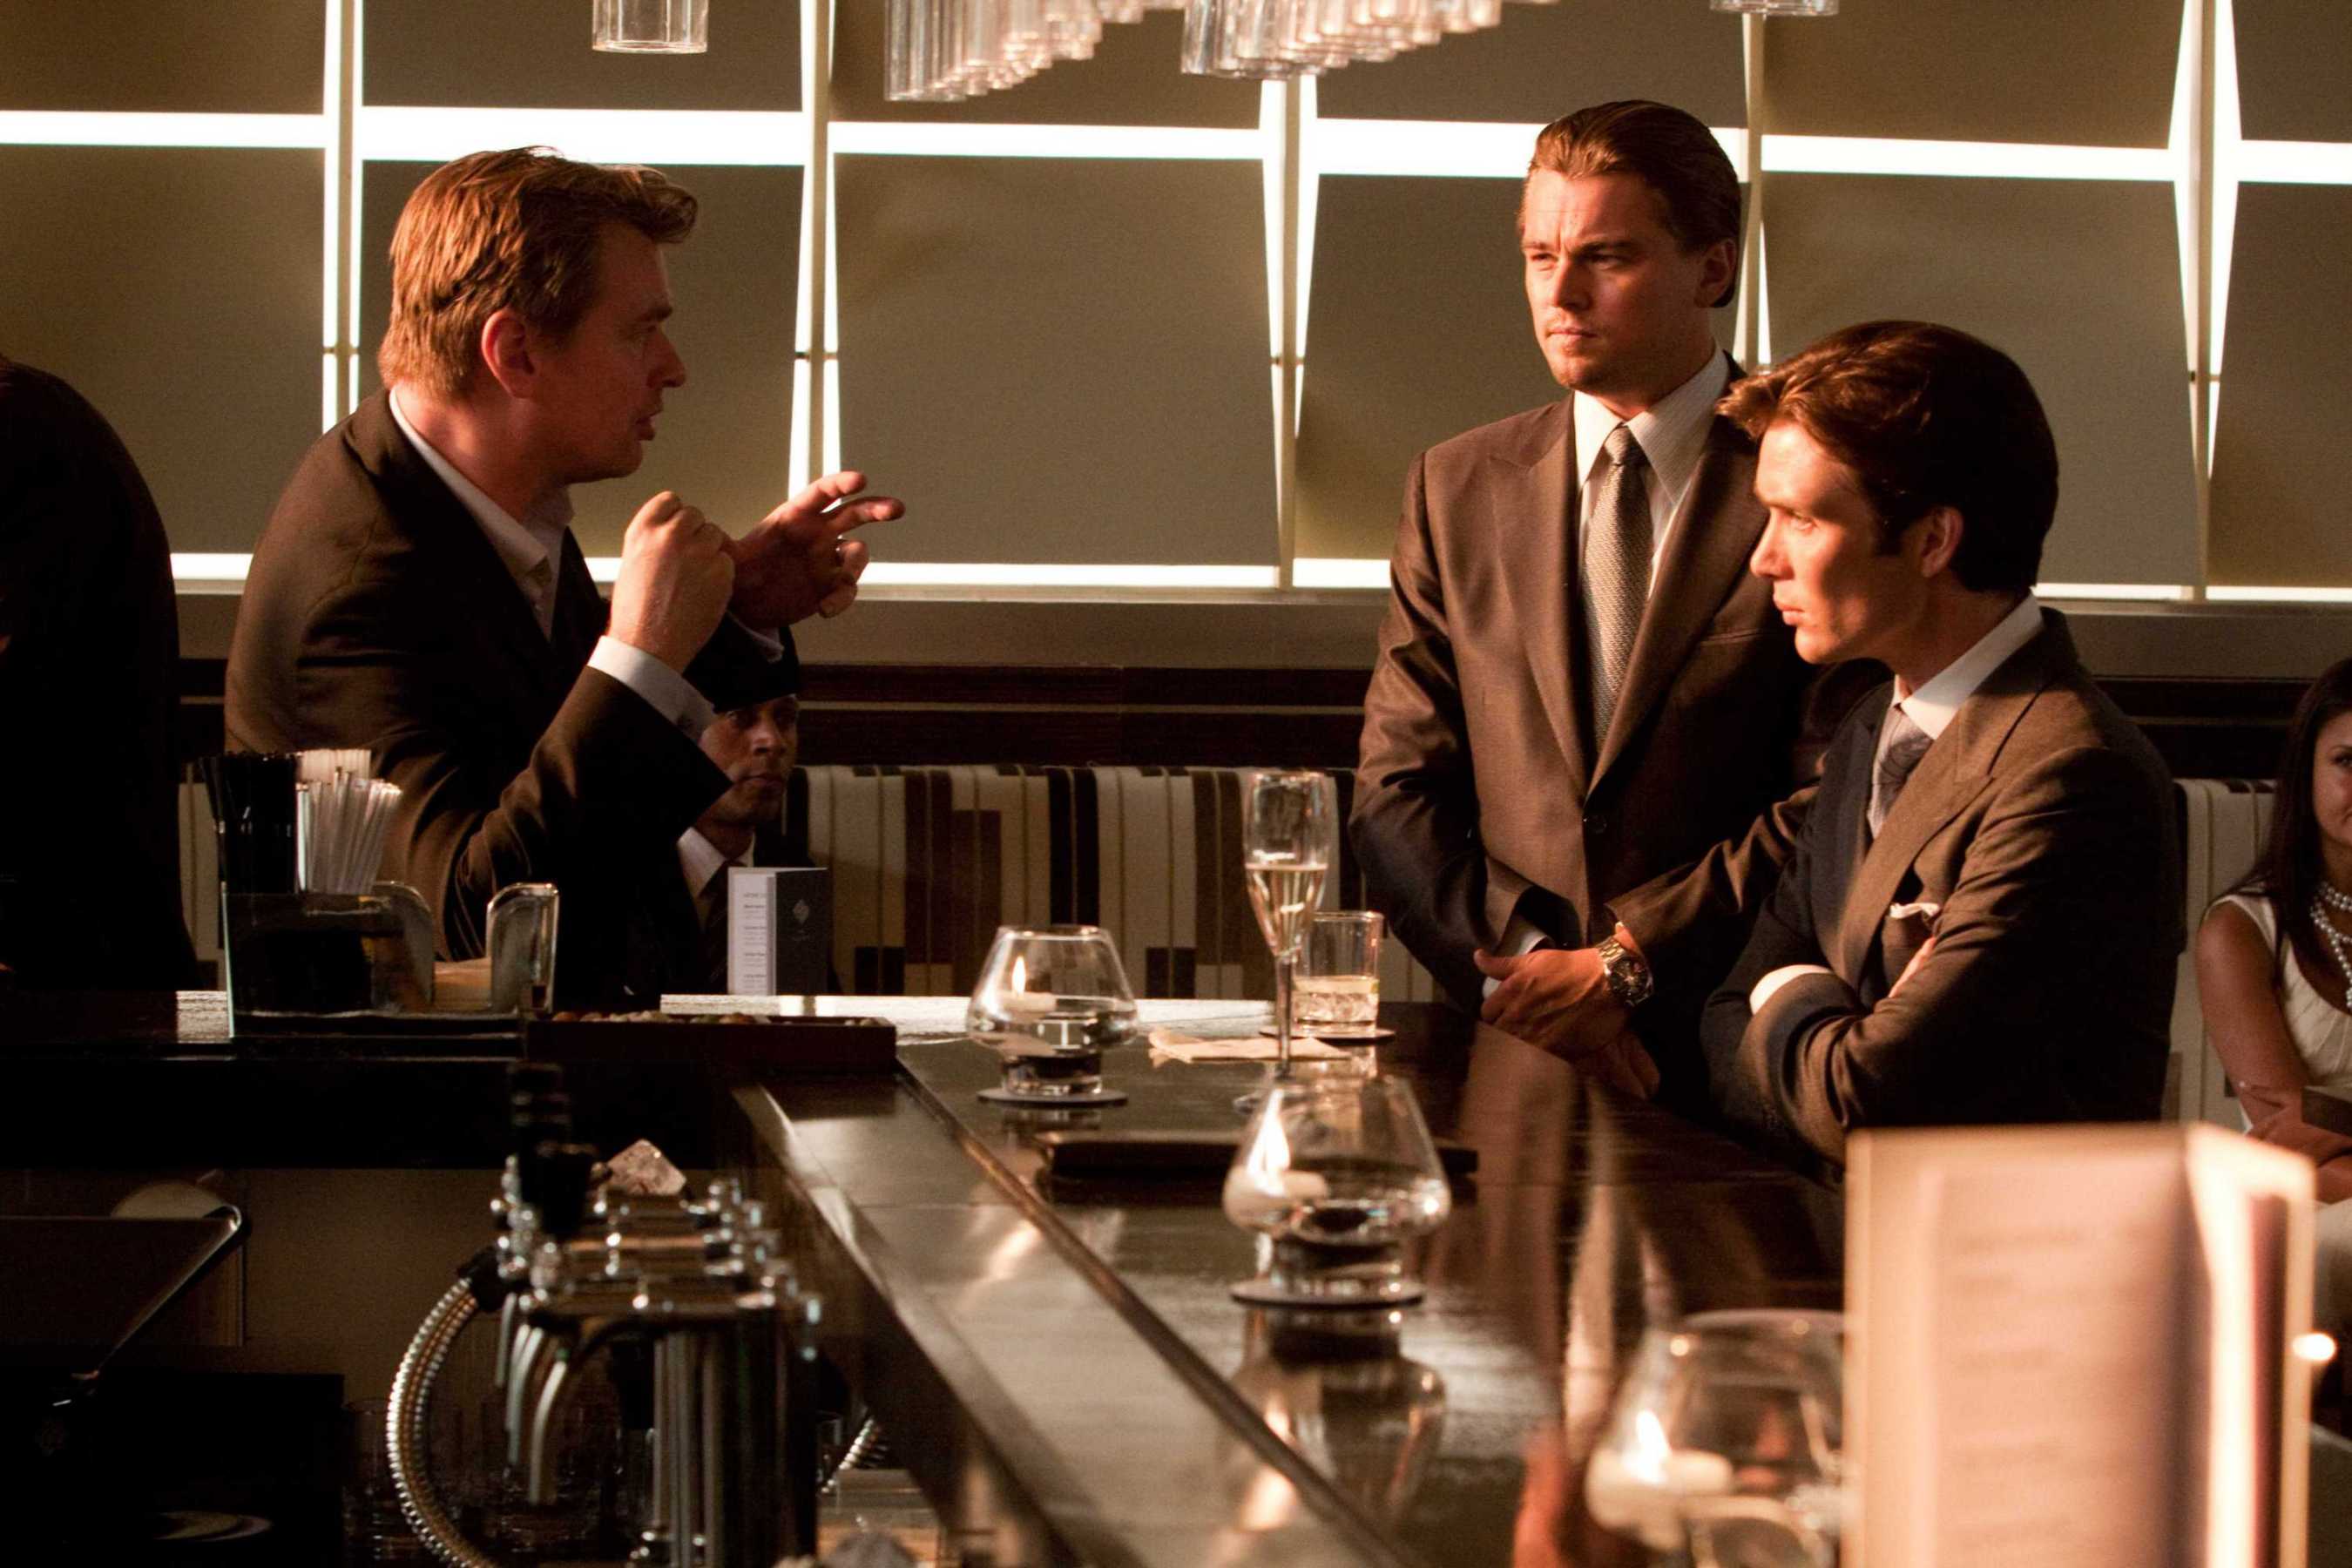 (L-r) Director CHRISTOPHER NOLAN with LEONARDO DiCAPRIO and CILLIAN MURPHY on the set of Warner Bros. PicturesÕ and Legendary PicturesÕ sci-fi action film ÒINCEPTION,Ó a Warner Bros. Pictures release.